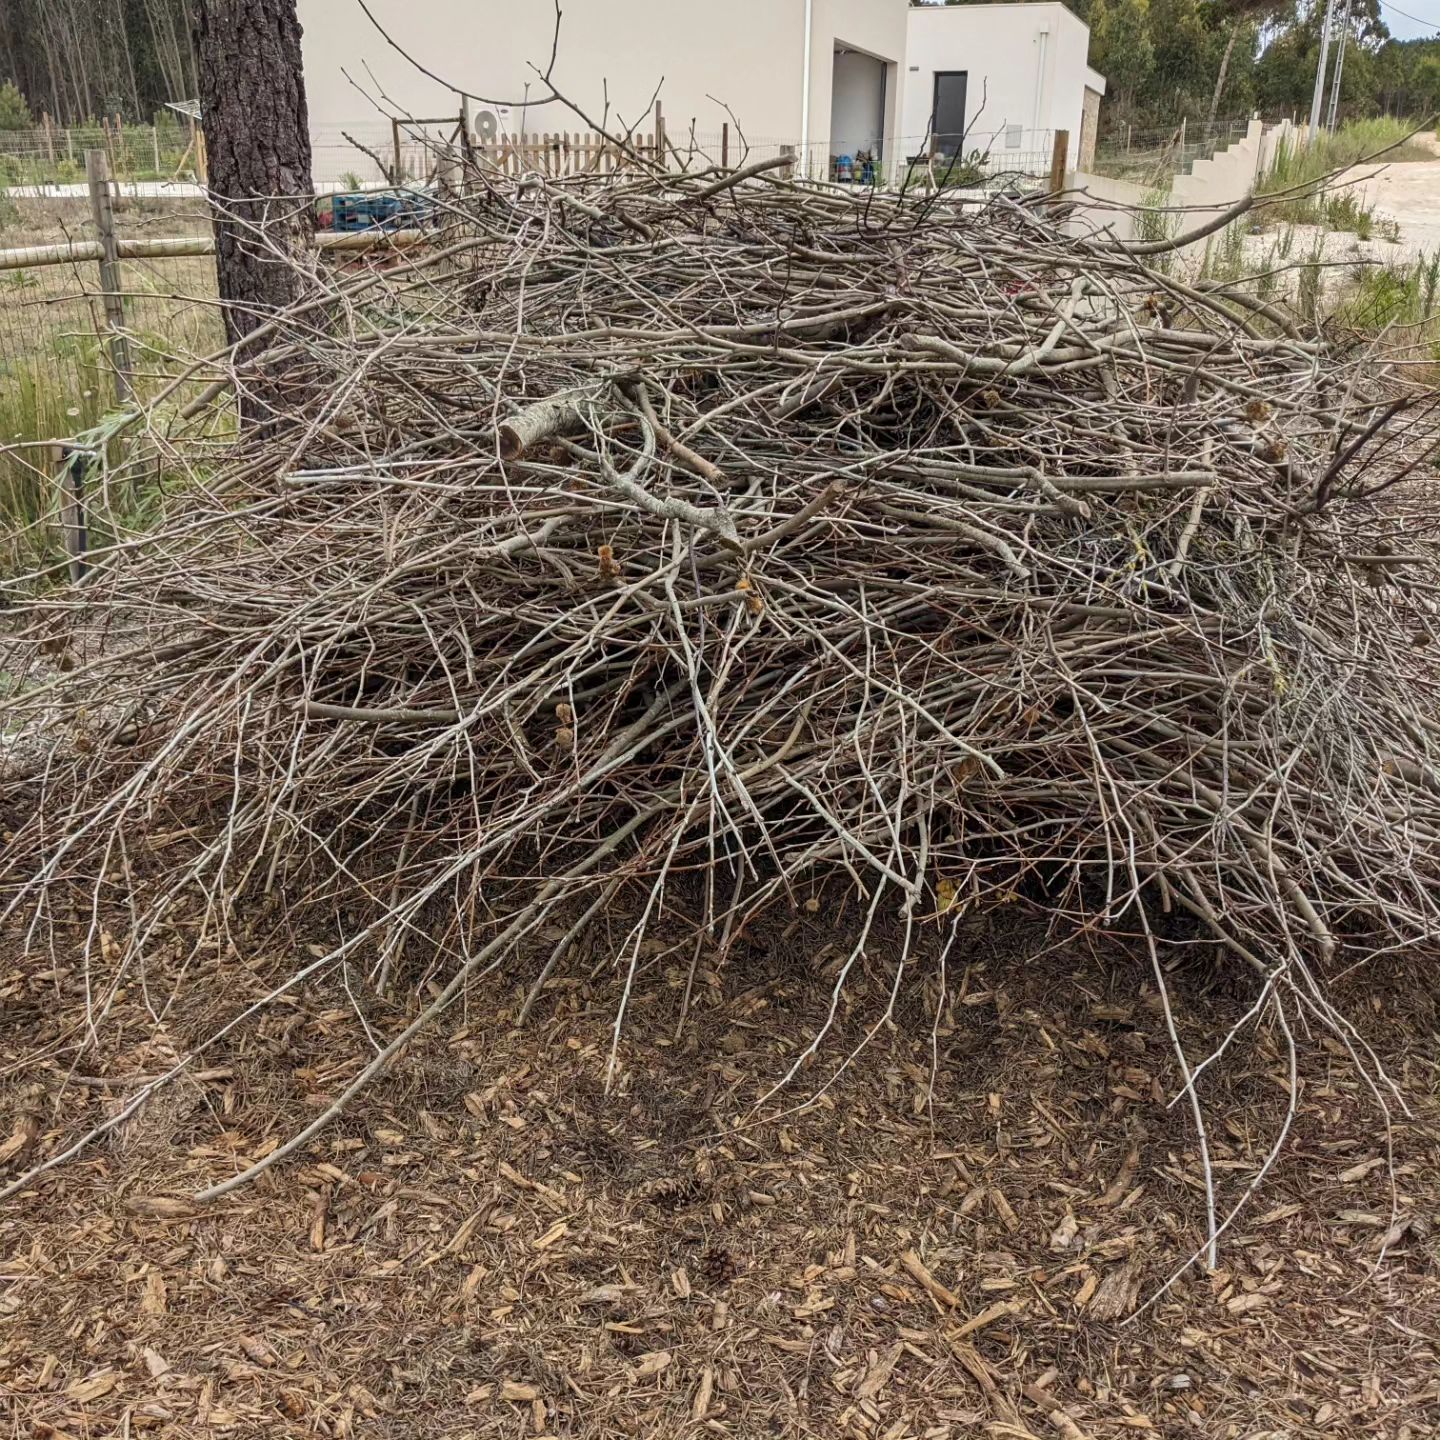 Moving this pile of branches to get to the wood chip underneath